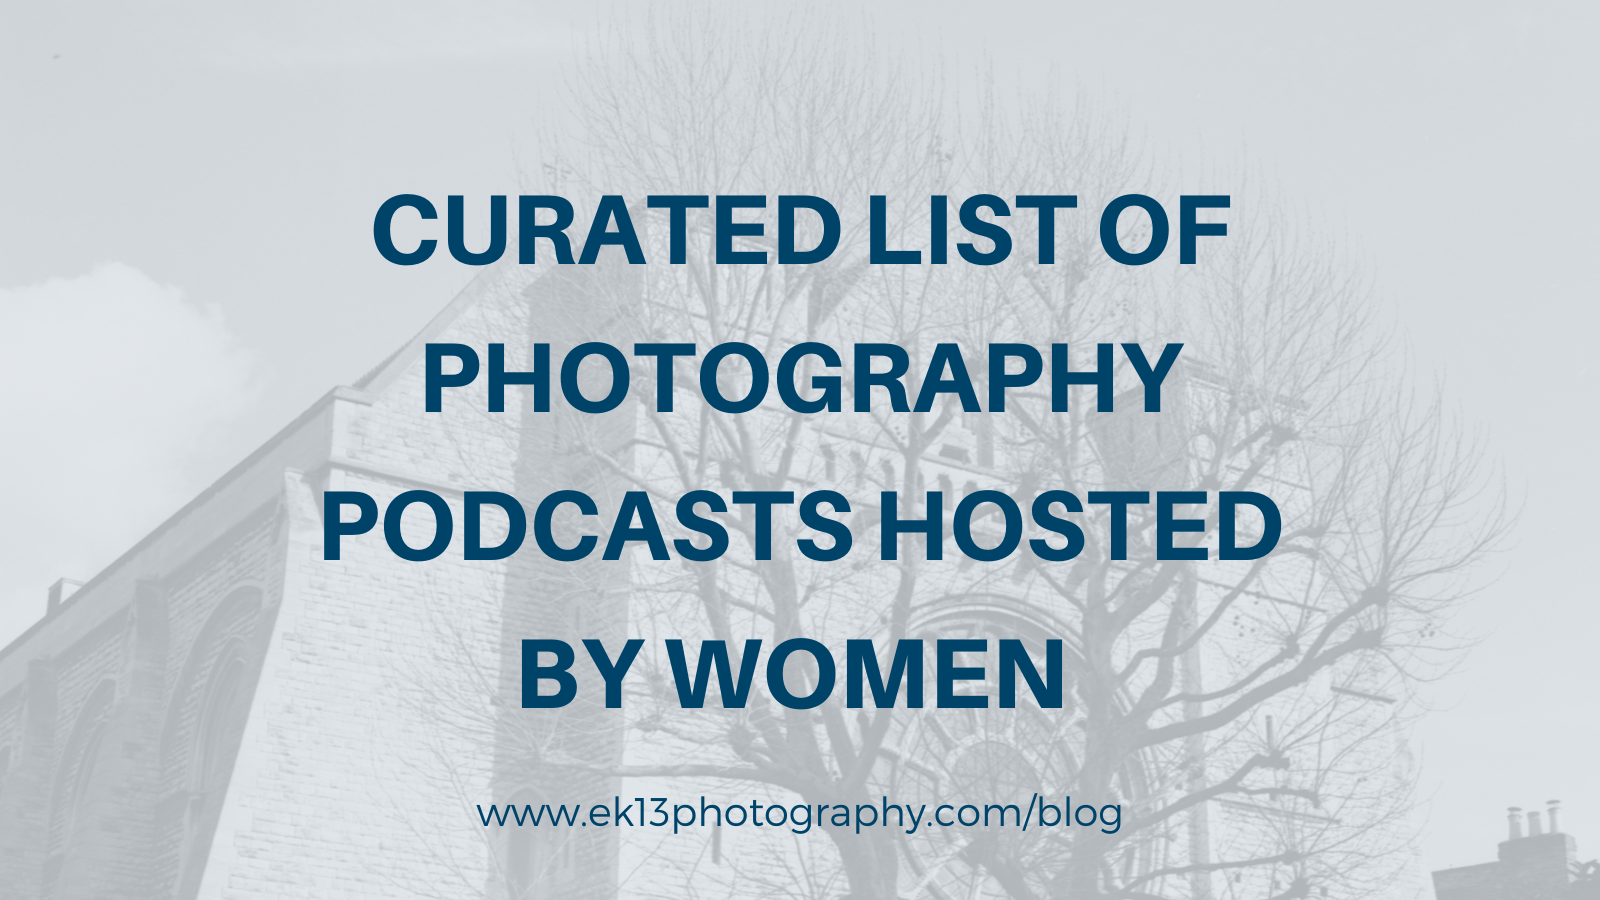 Curated List of Photography Podcasts Hosted by Women